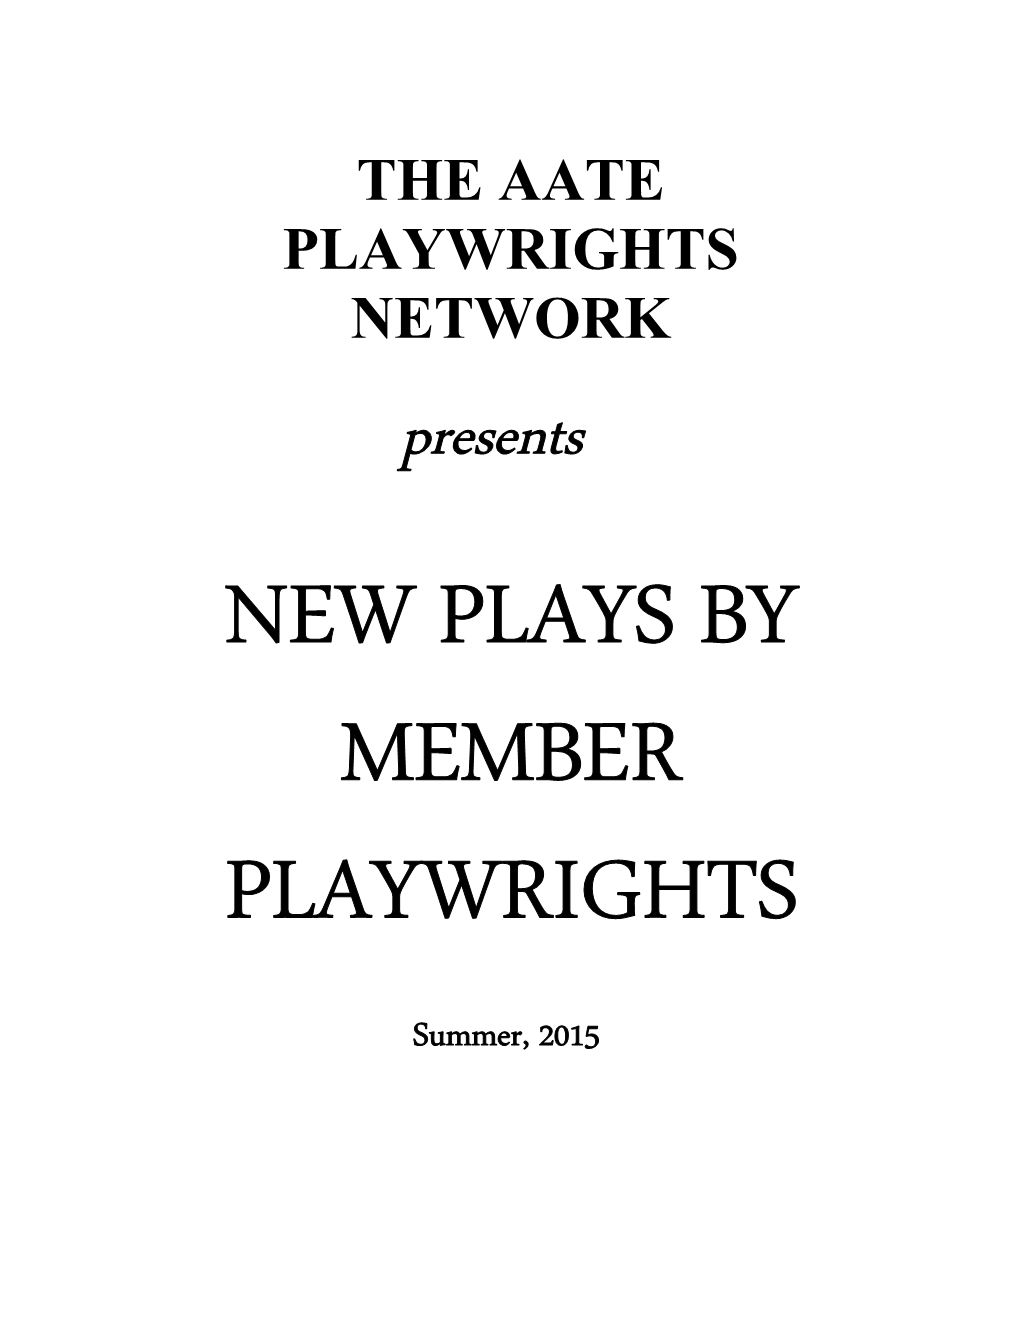 The Aate Playwrights Network